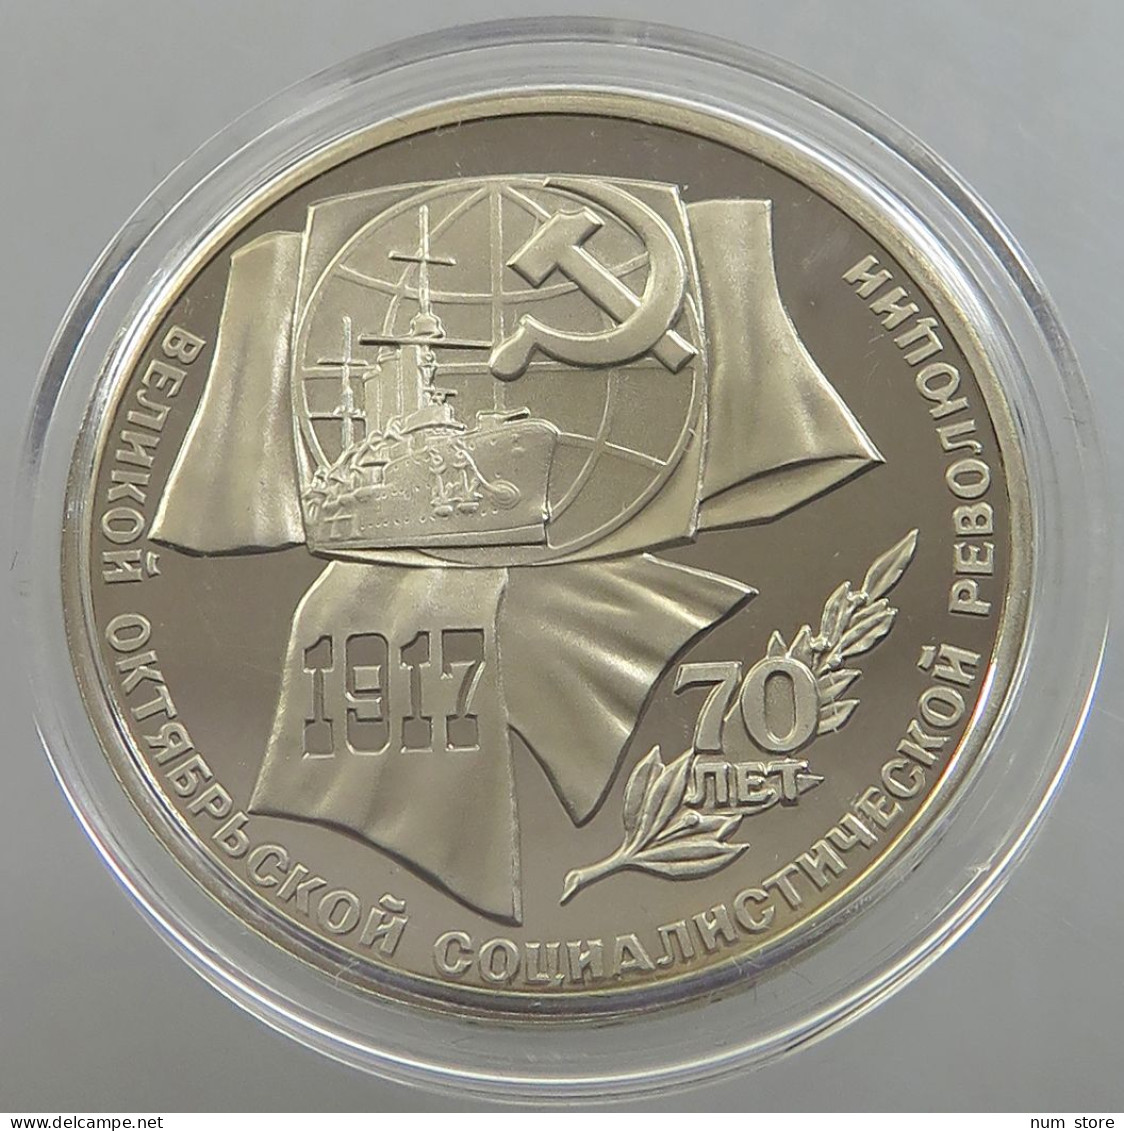 RUSSIA USSR 1 ROUBLE 1987 PROOF #sm14 0659 - Rusland